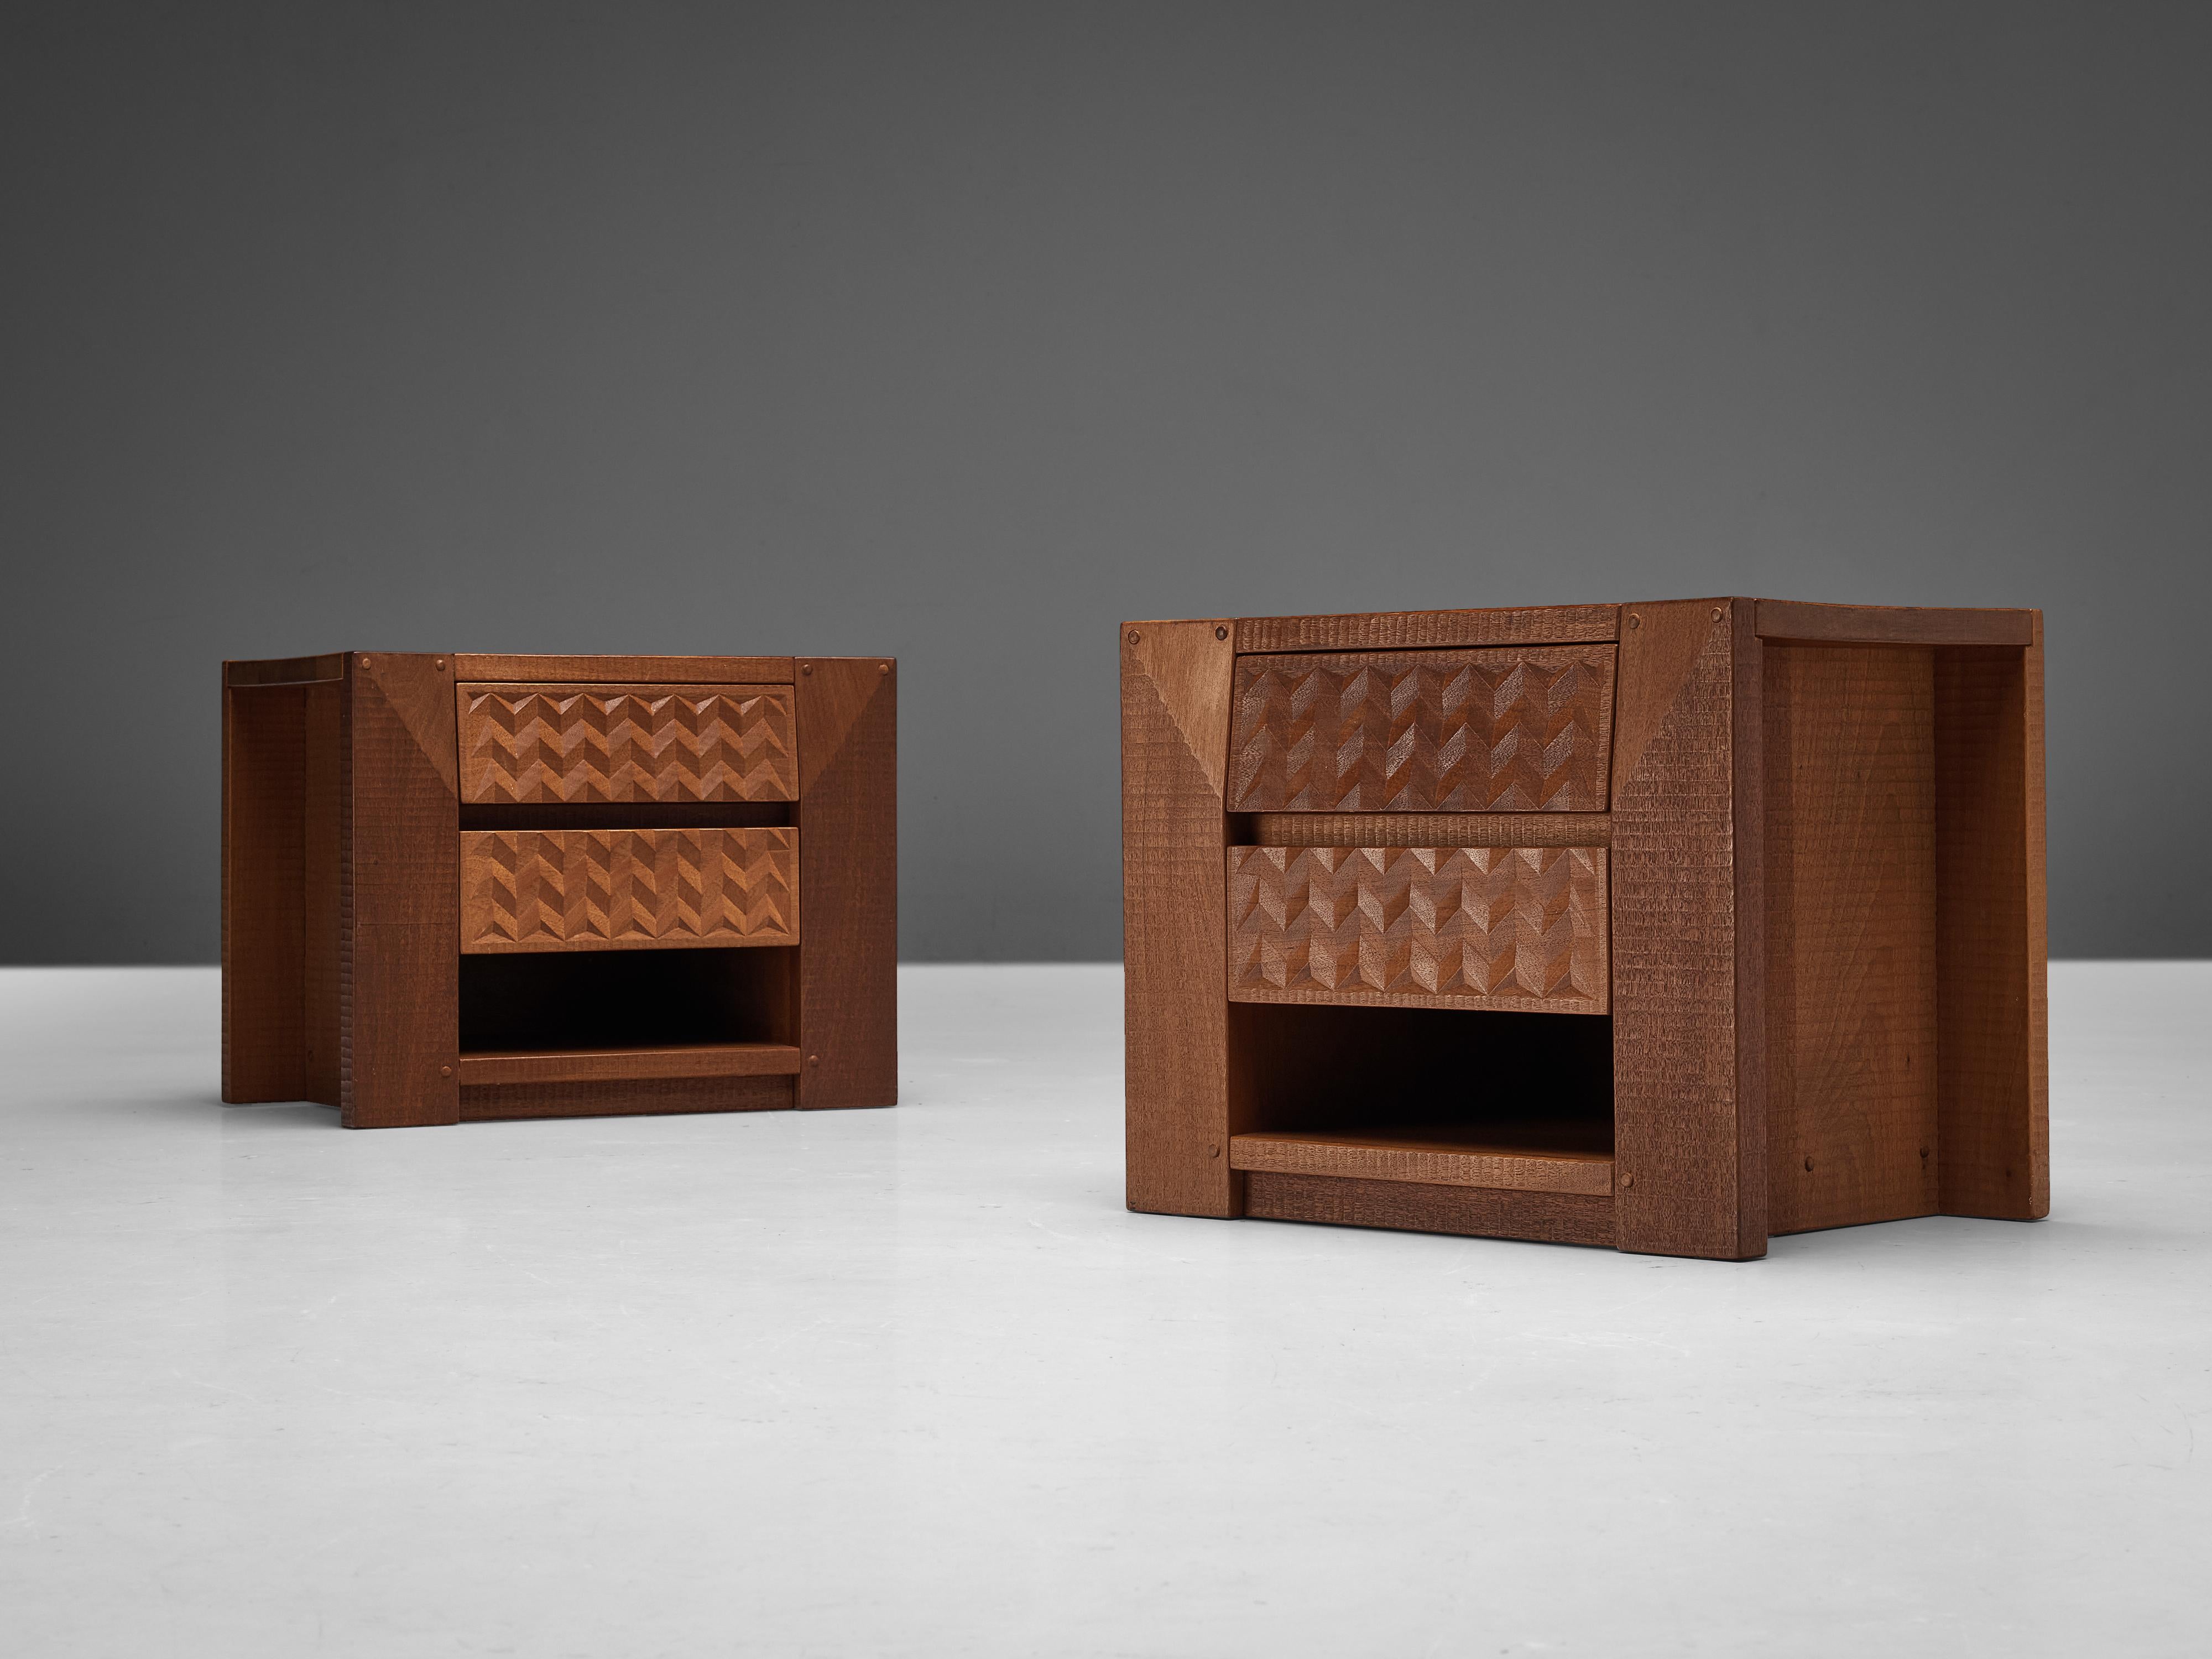 Giuseppe Rivadossi, nightstands in teak, Italy, 1980s

Pair of nightstands designed by the Italian sculptor and designer Giuseppe Rivadossi. This excellent set features a high-level of craftsmanship in woodwork. The stunning herringbone pattern on